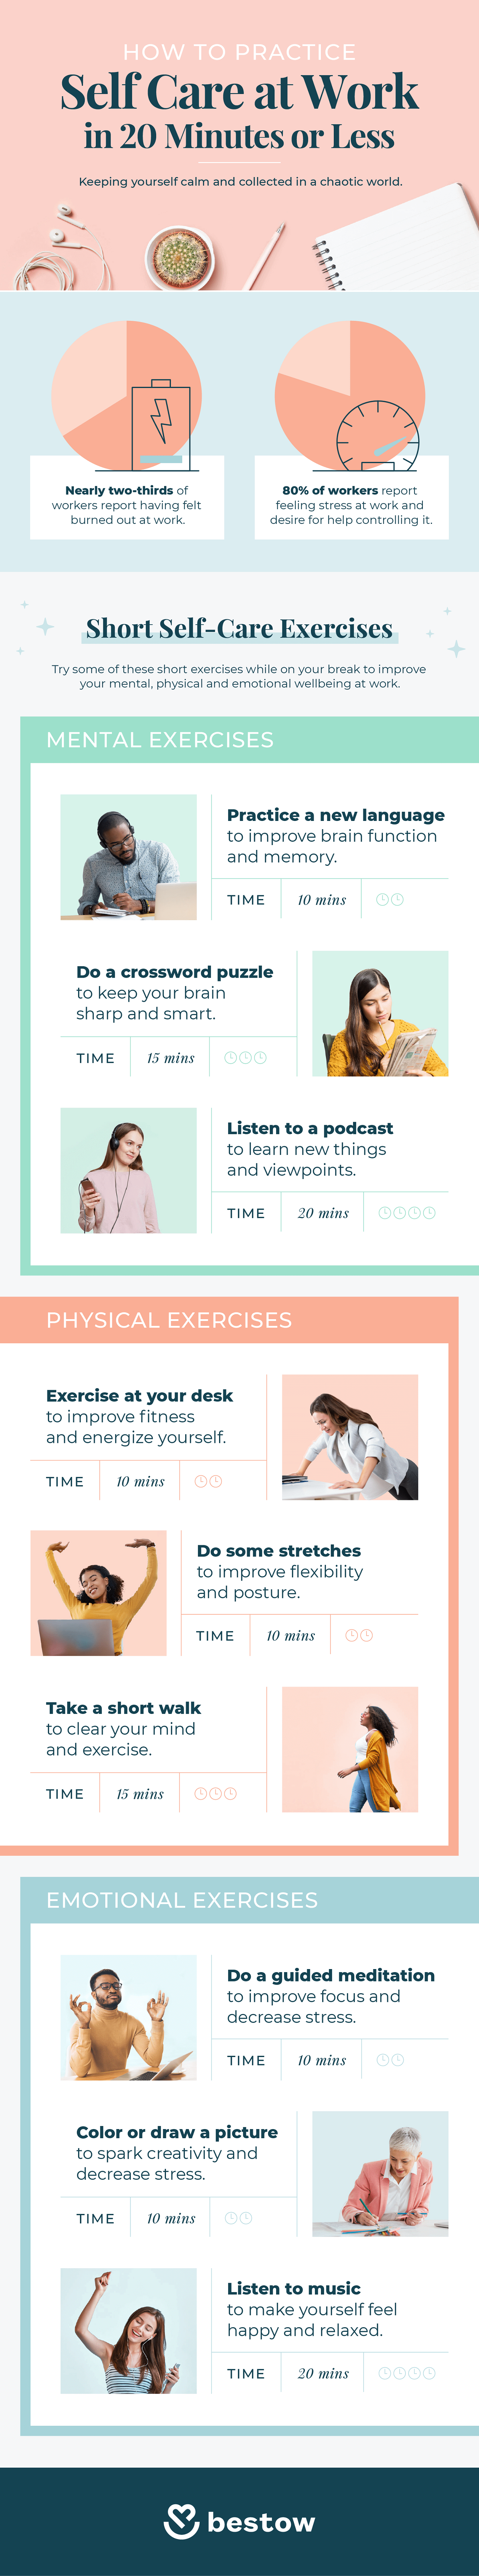 How to Practice Self Care While Working + Exercises #infographic